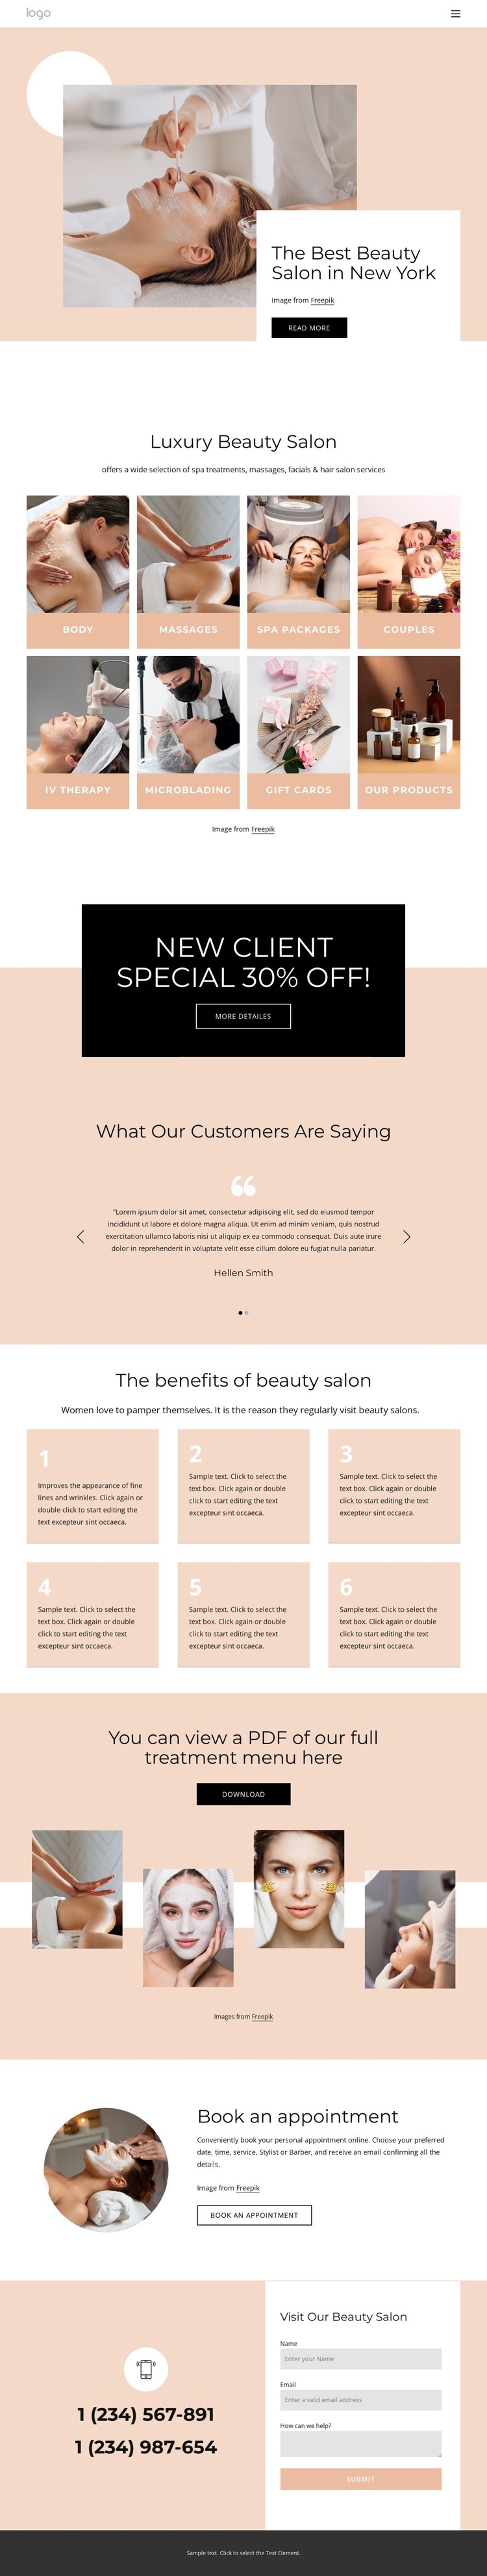 The best beauty salon in NYC Static Site Generator